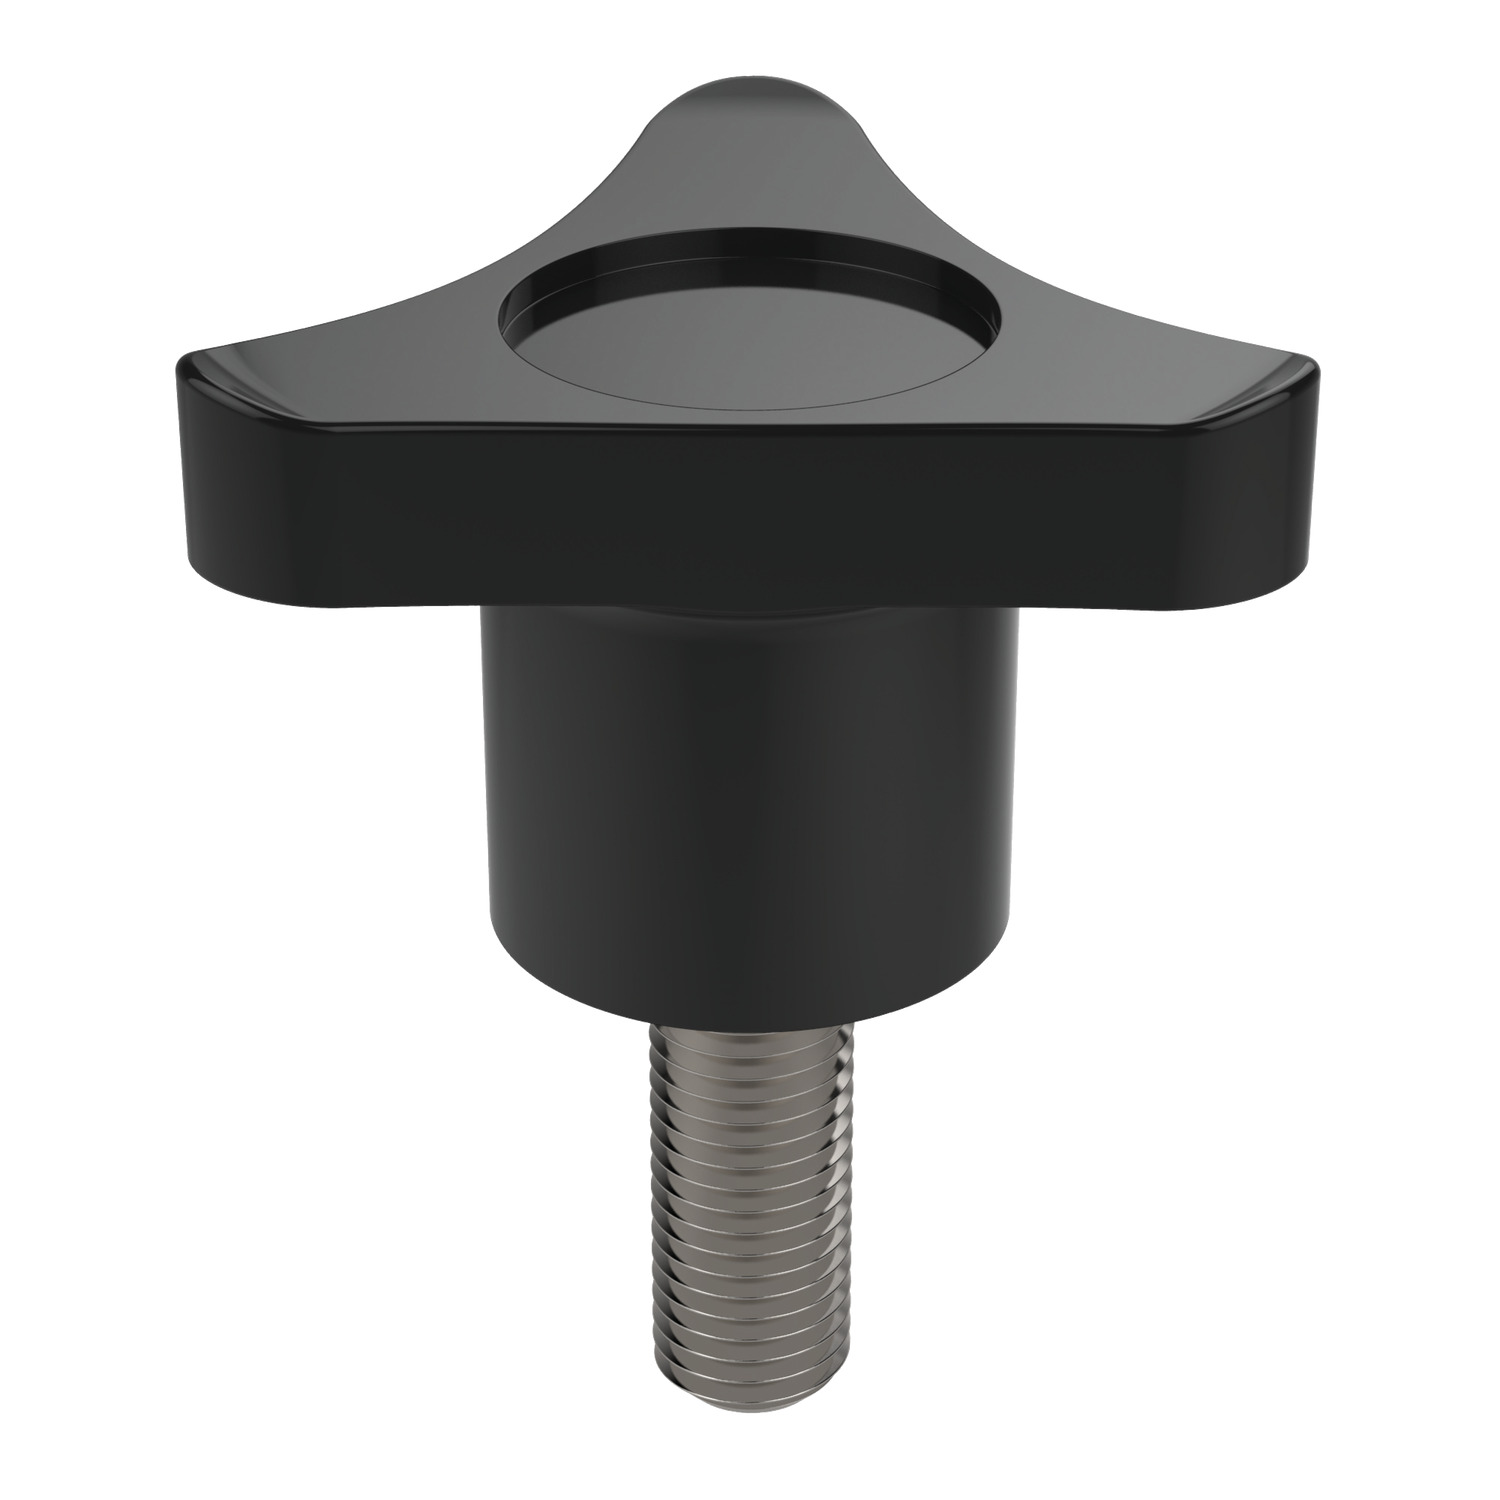 Three Lobed Knobs Black plastic three lobed knobs. Sizes range from M6 to M12. Available from stock.